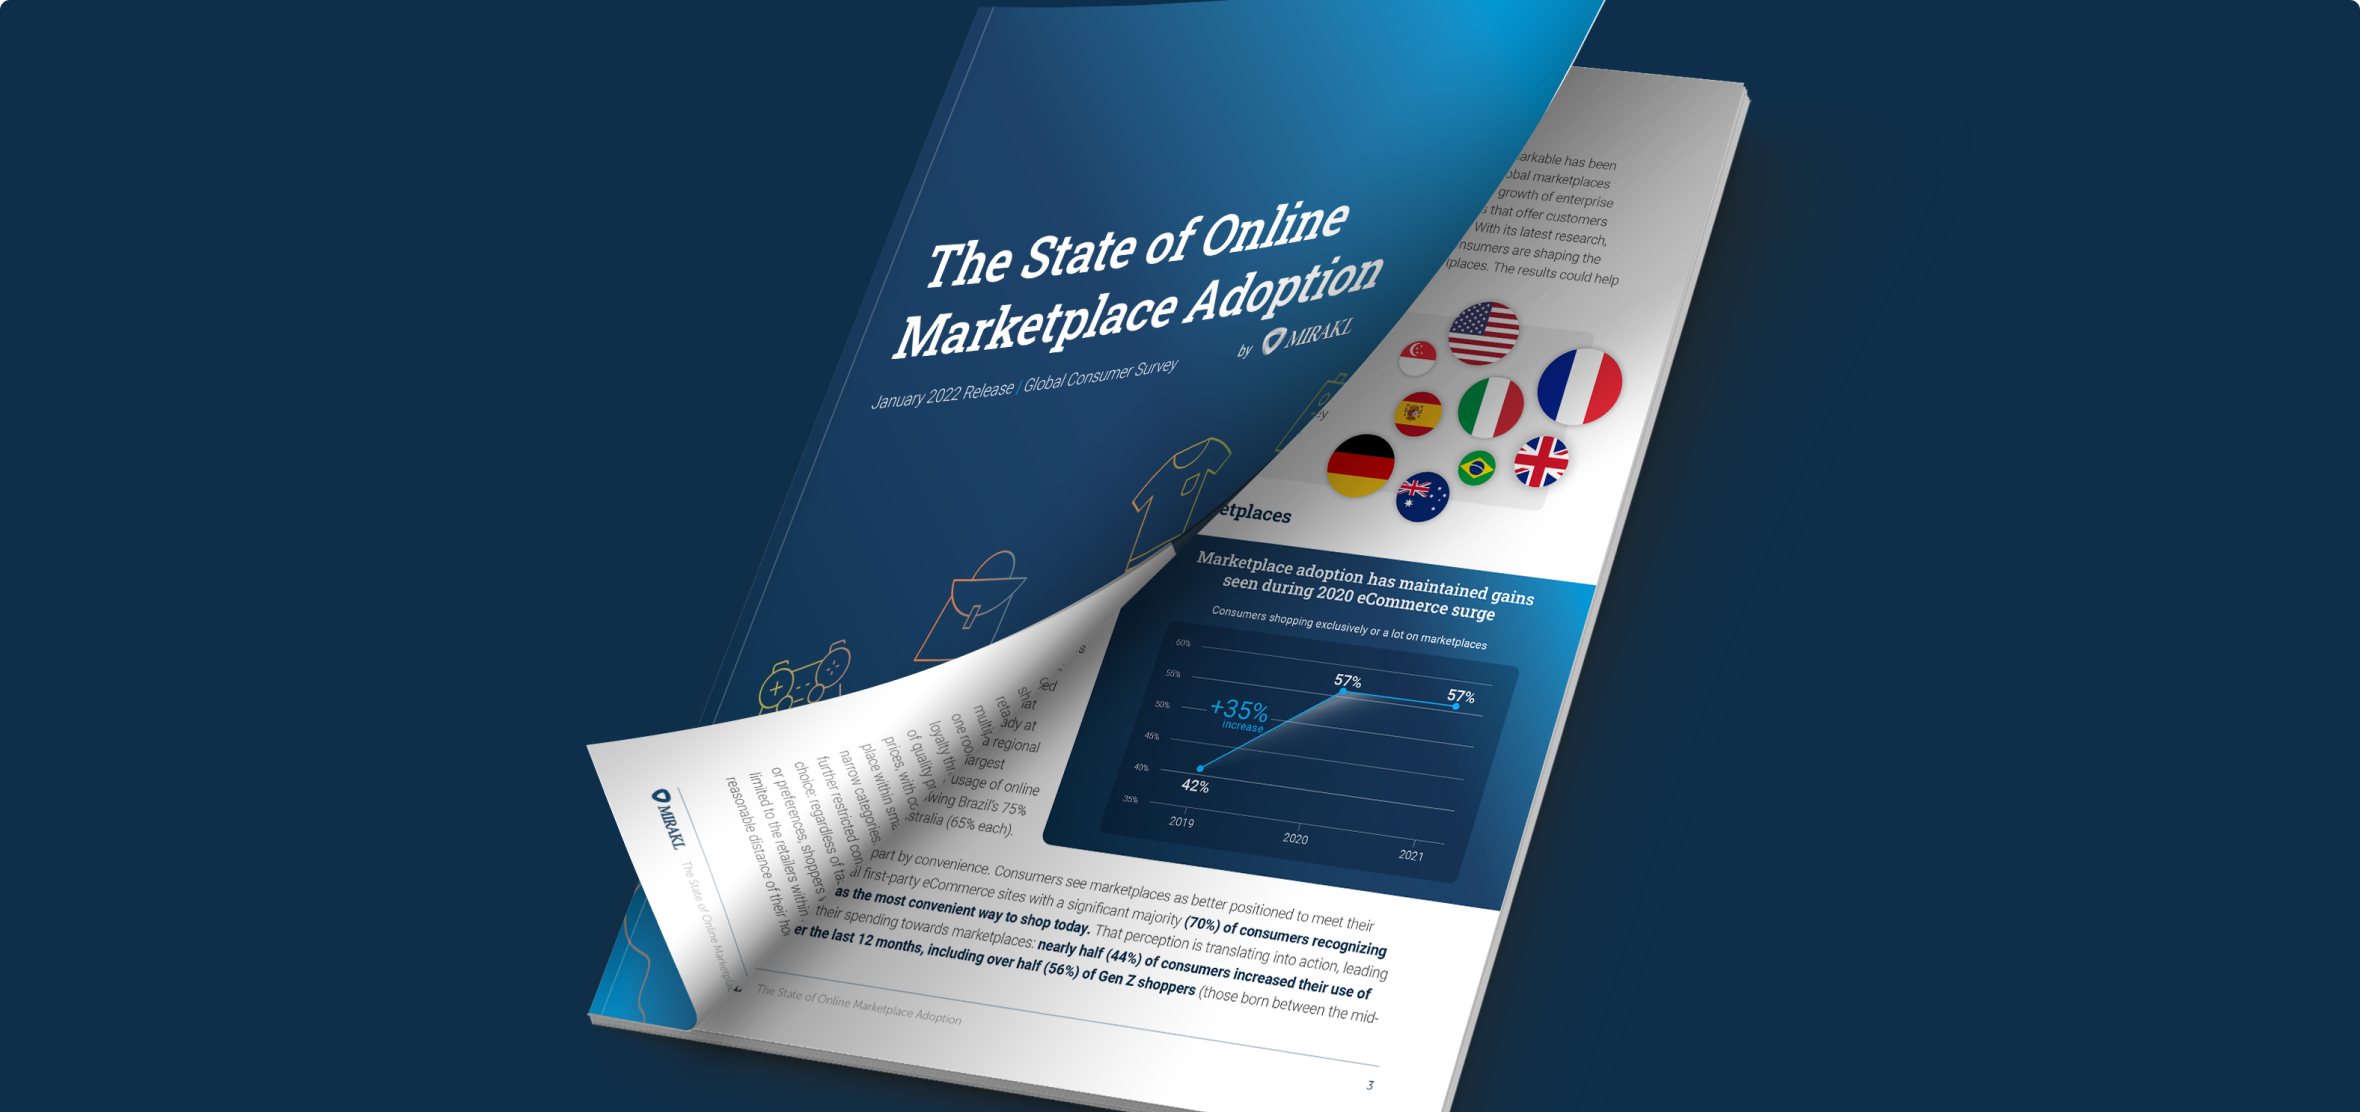 The State of Online Marketplace Adoption by Mirakl